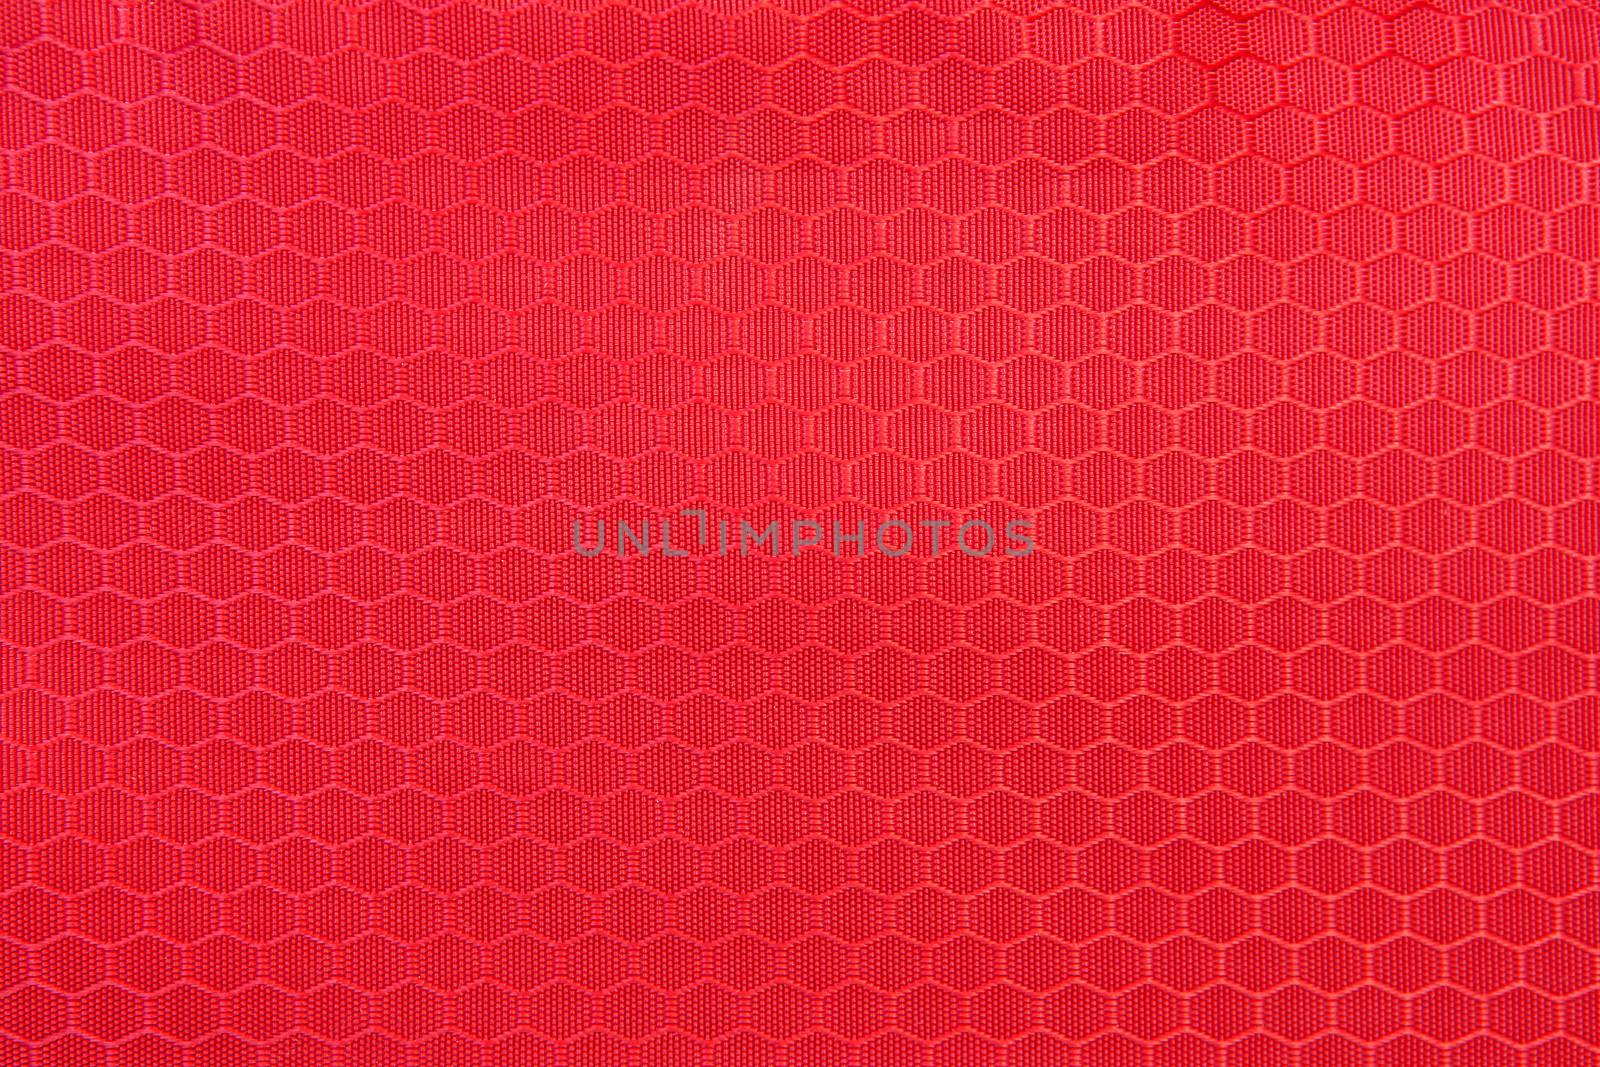 red honeycomb background texture. Texture background of polyester fabric. Plastic weave fabric pattern